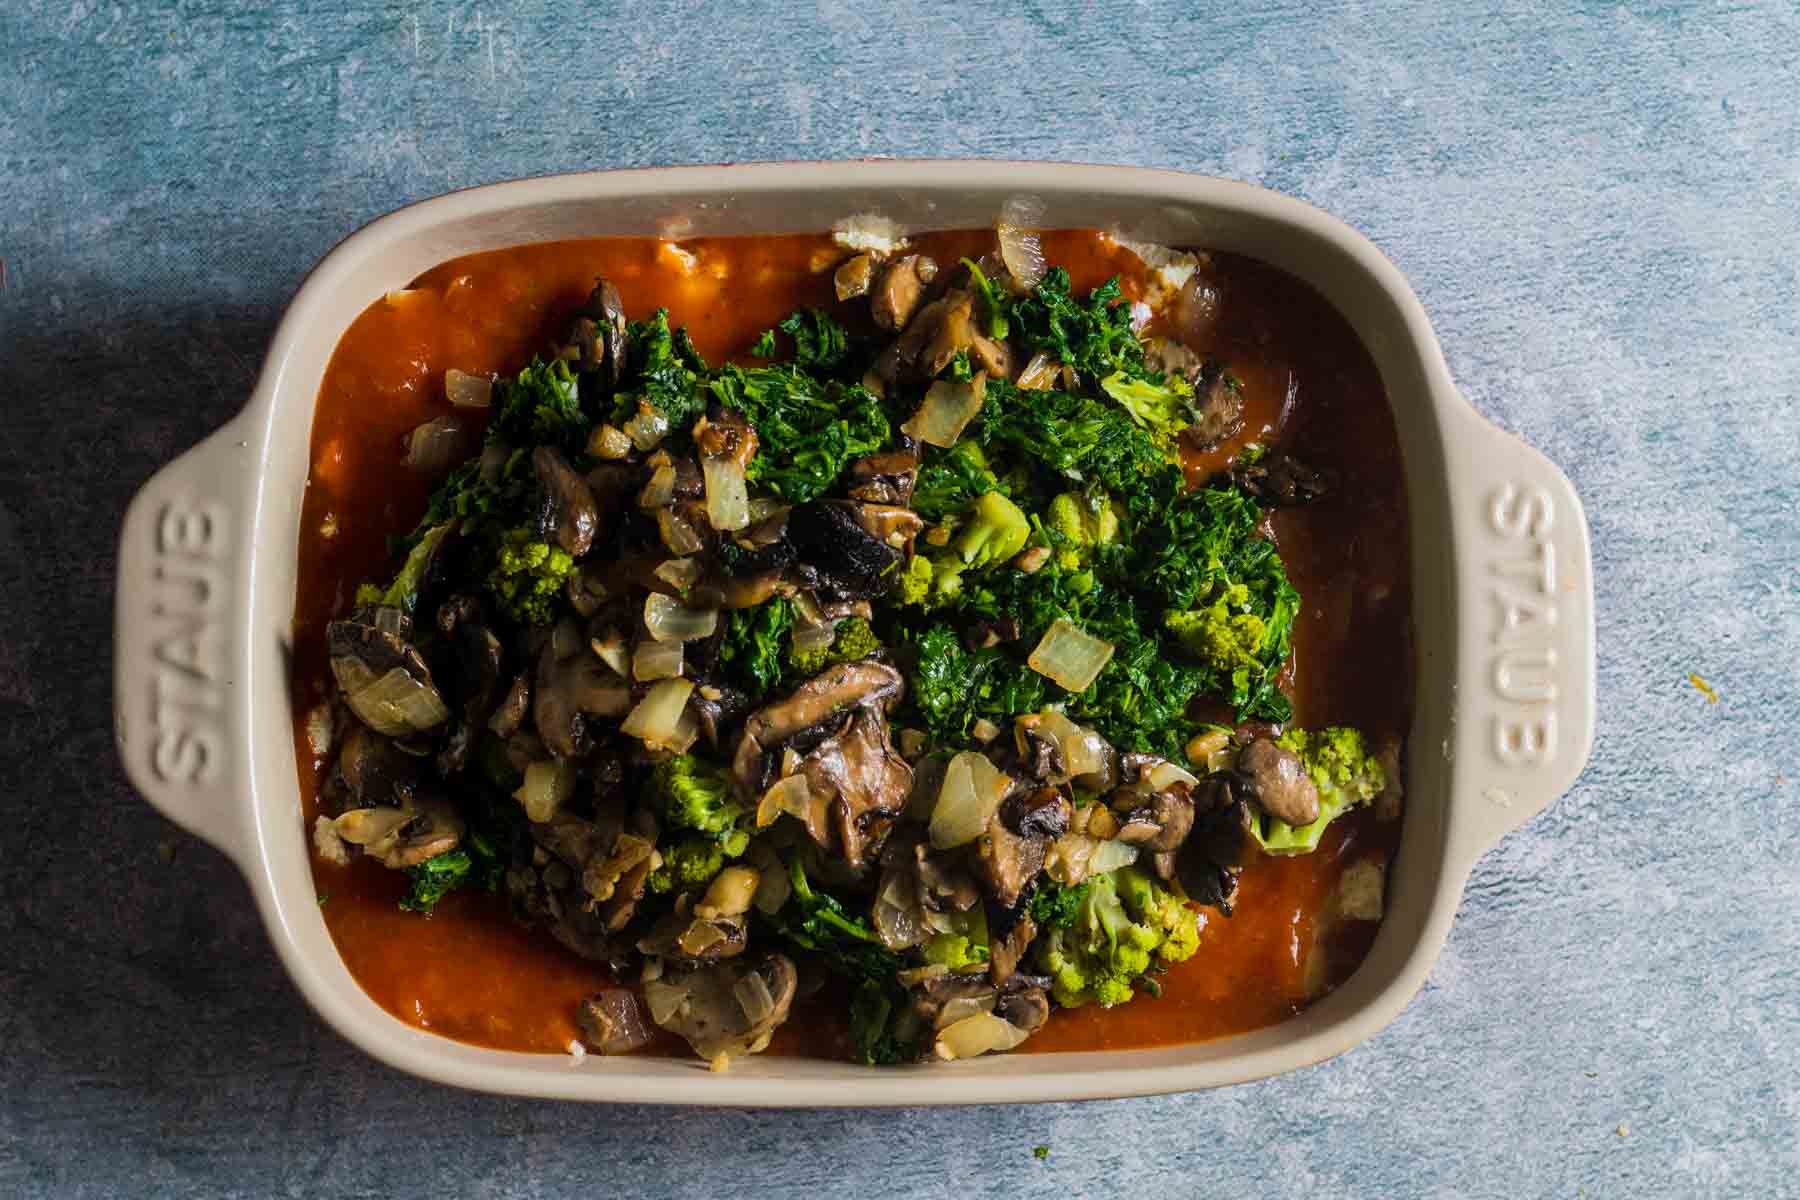 green vegetables and mushrooms on top of red sauce in a baking dish